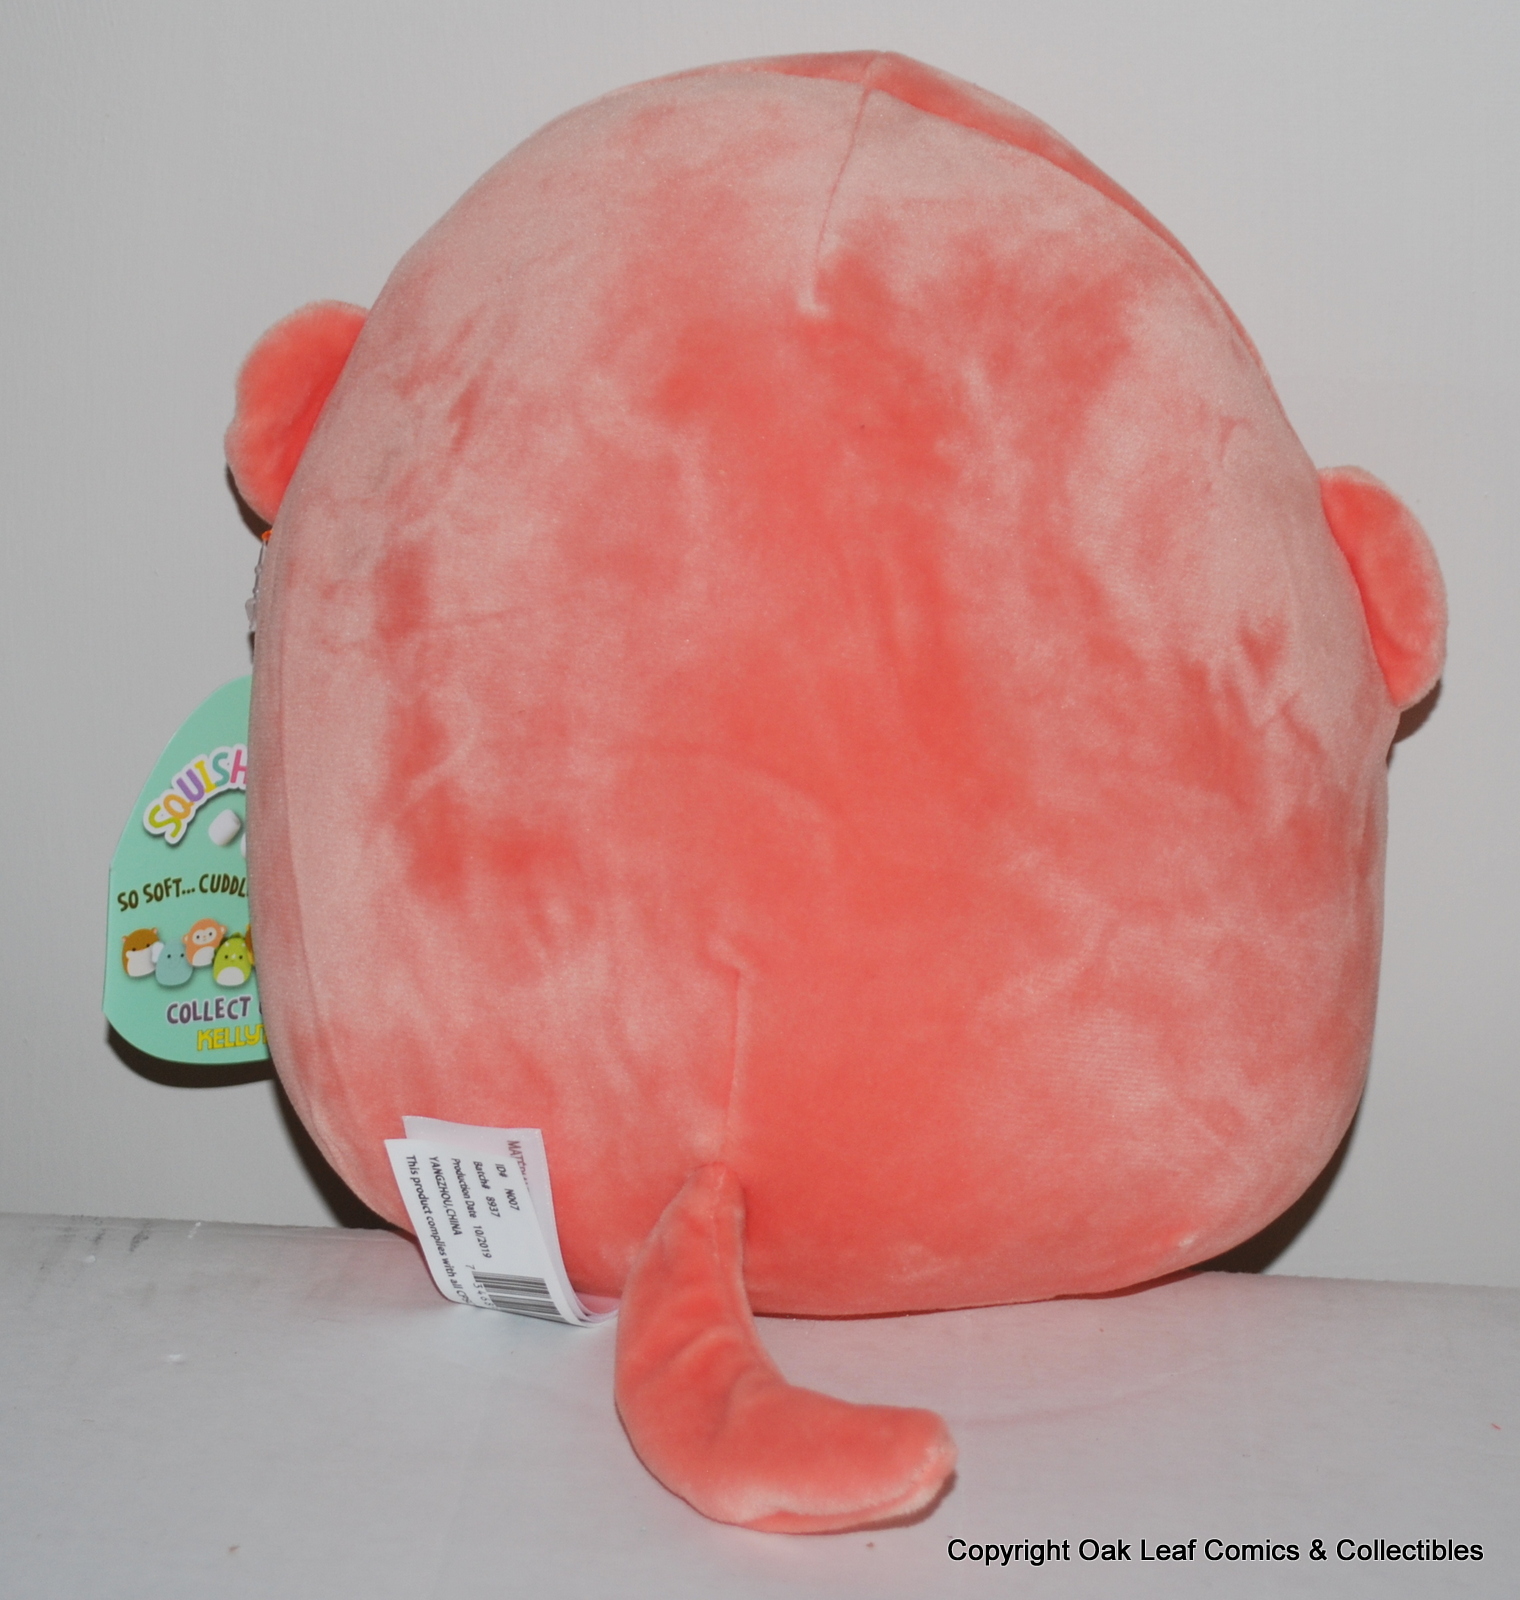 Elton the Monkey Squishmallow 8/" 8 Inch New With Tags CUTE!